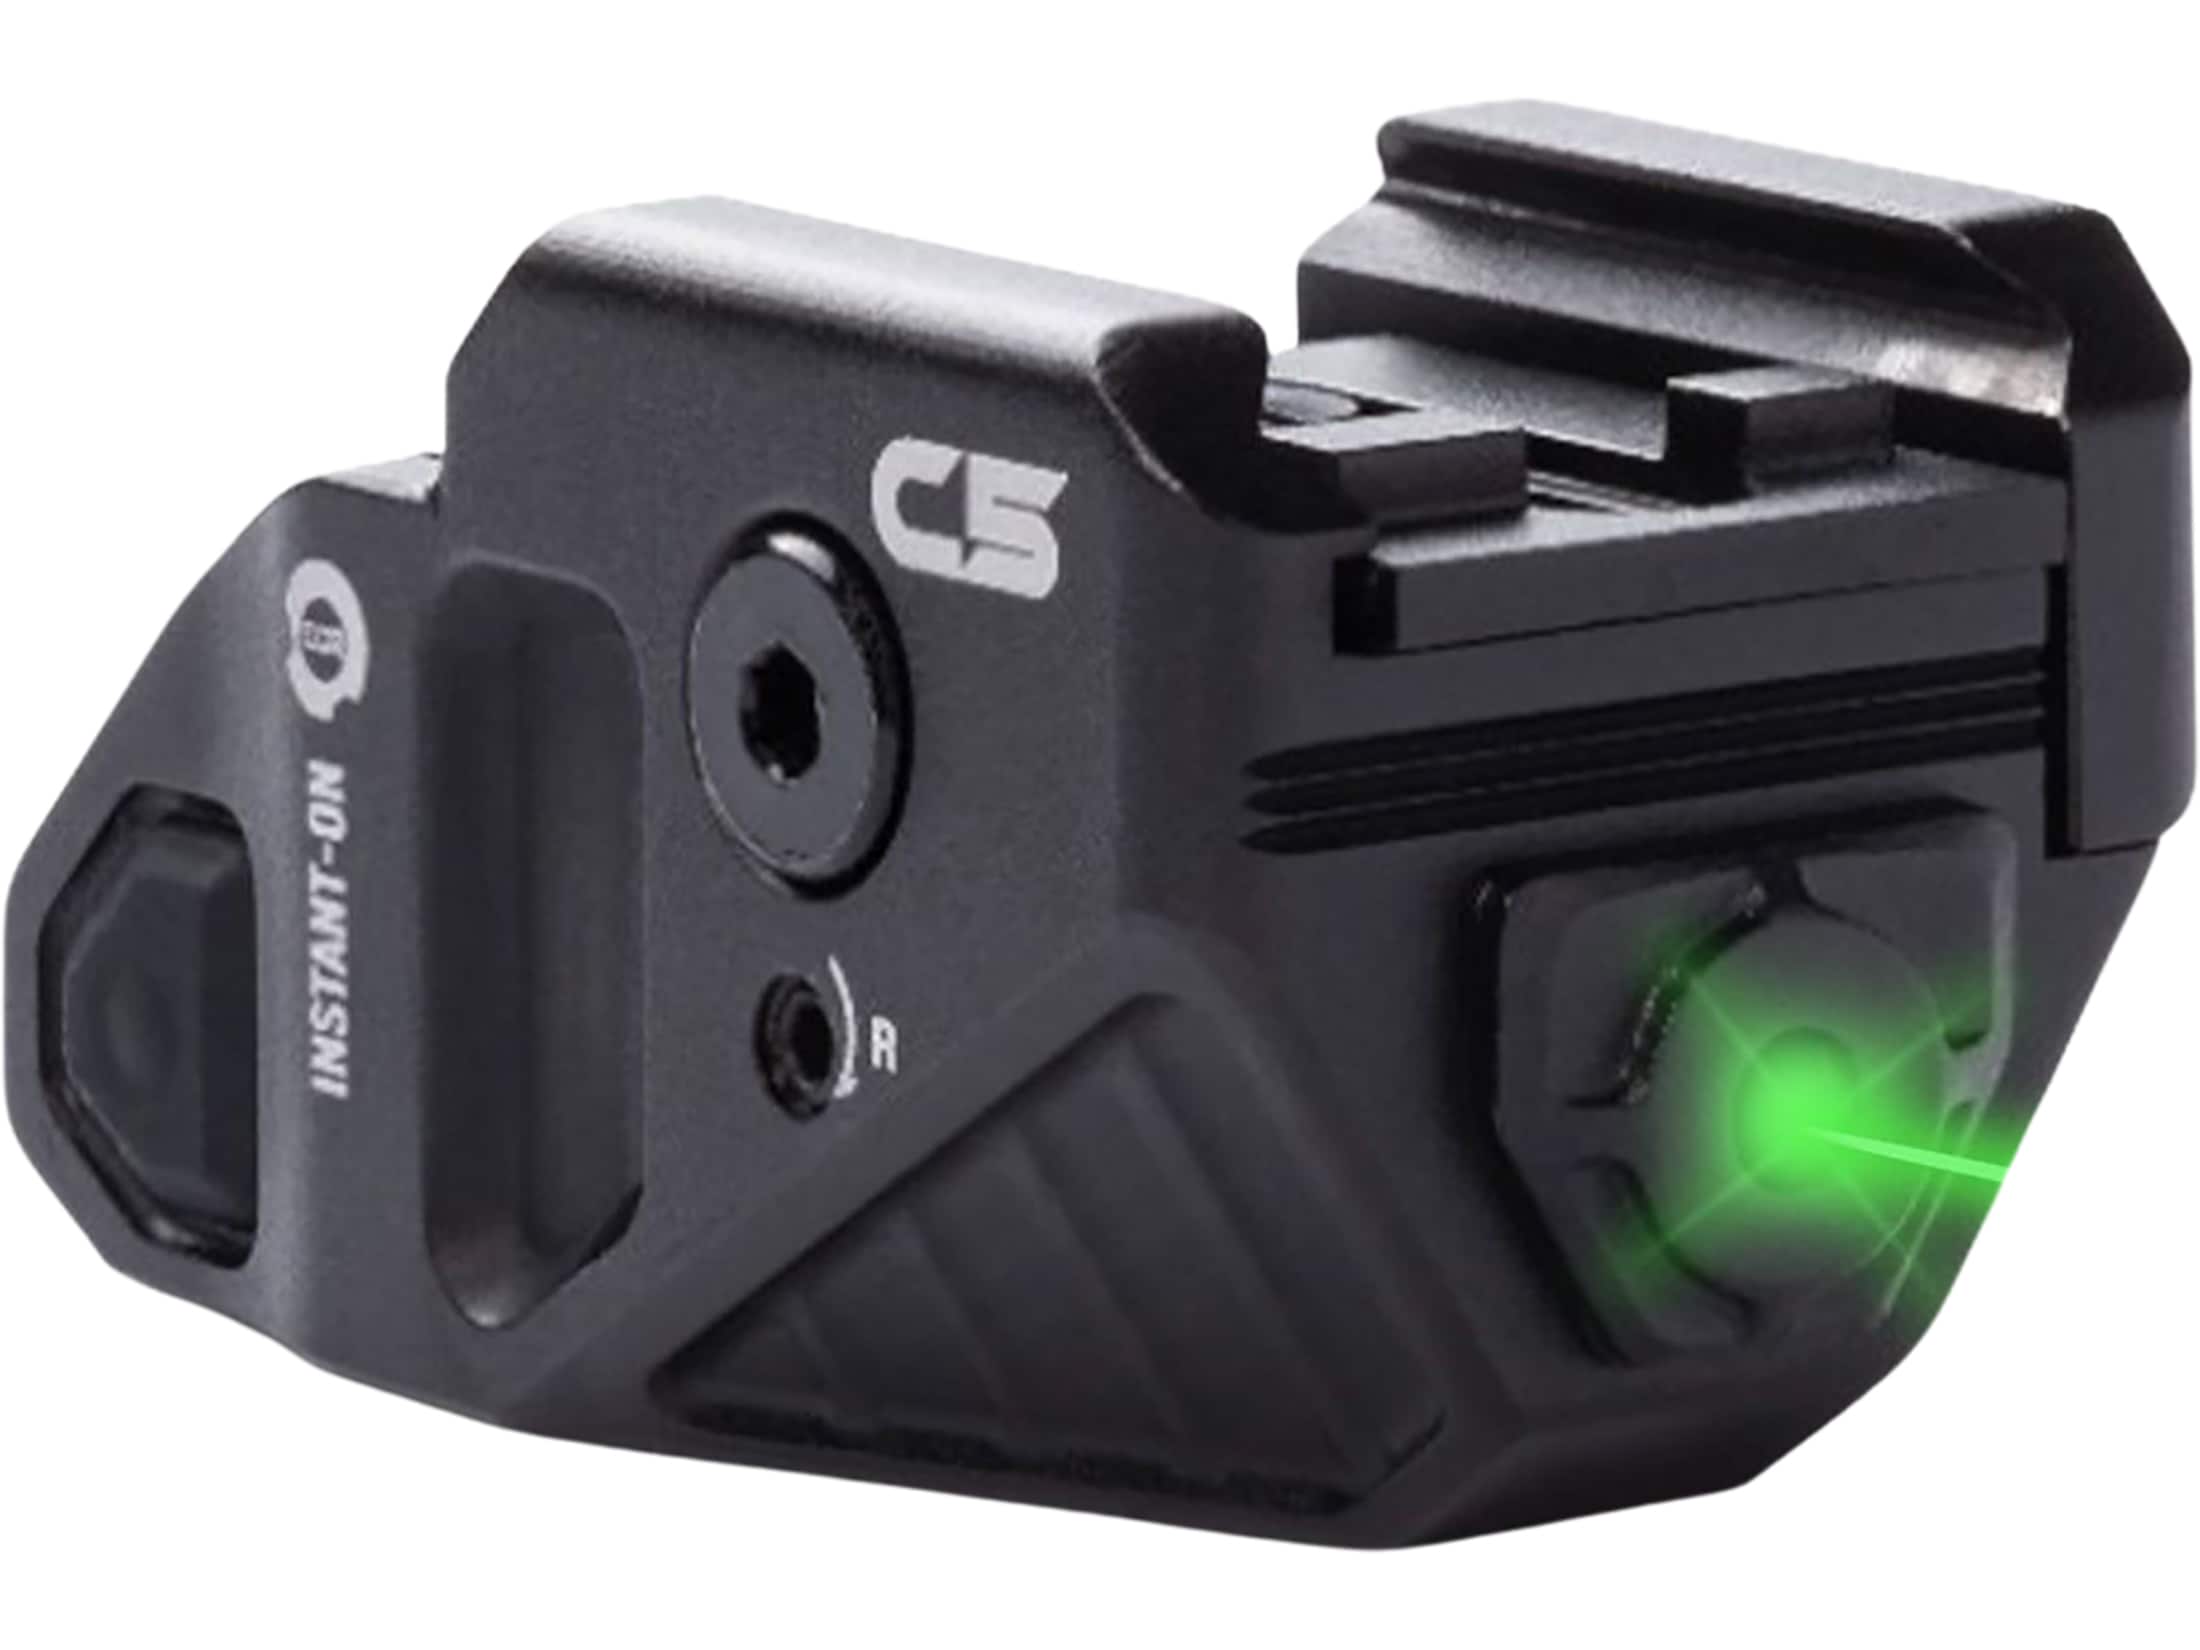 Viridian Essential Green Laser Sight for the Ruger Max 9